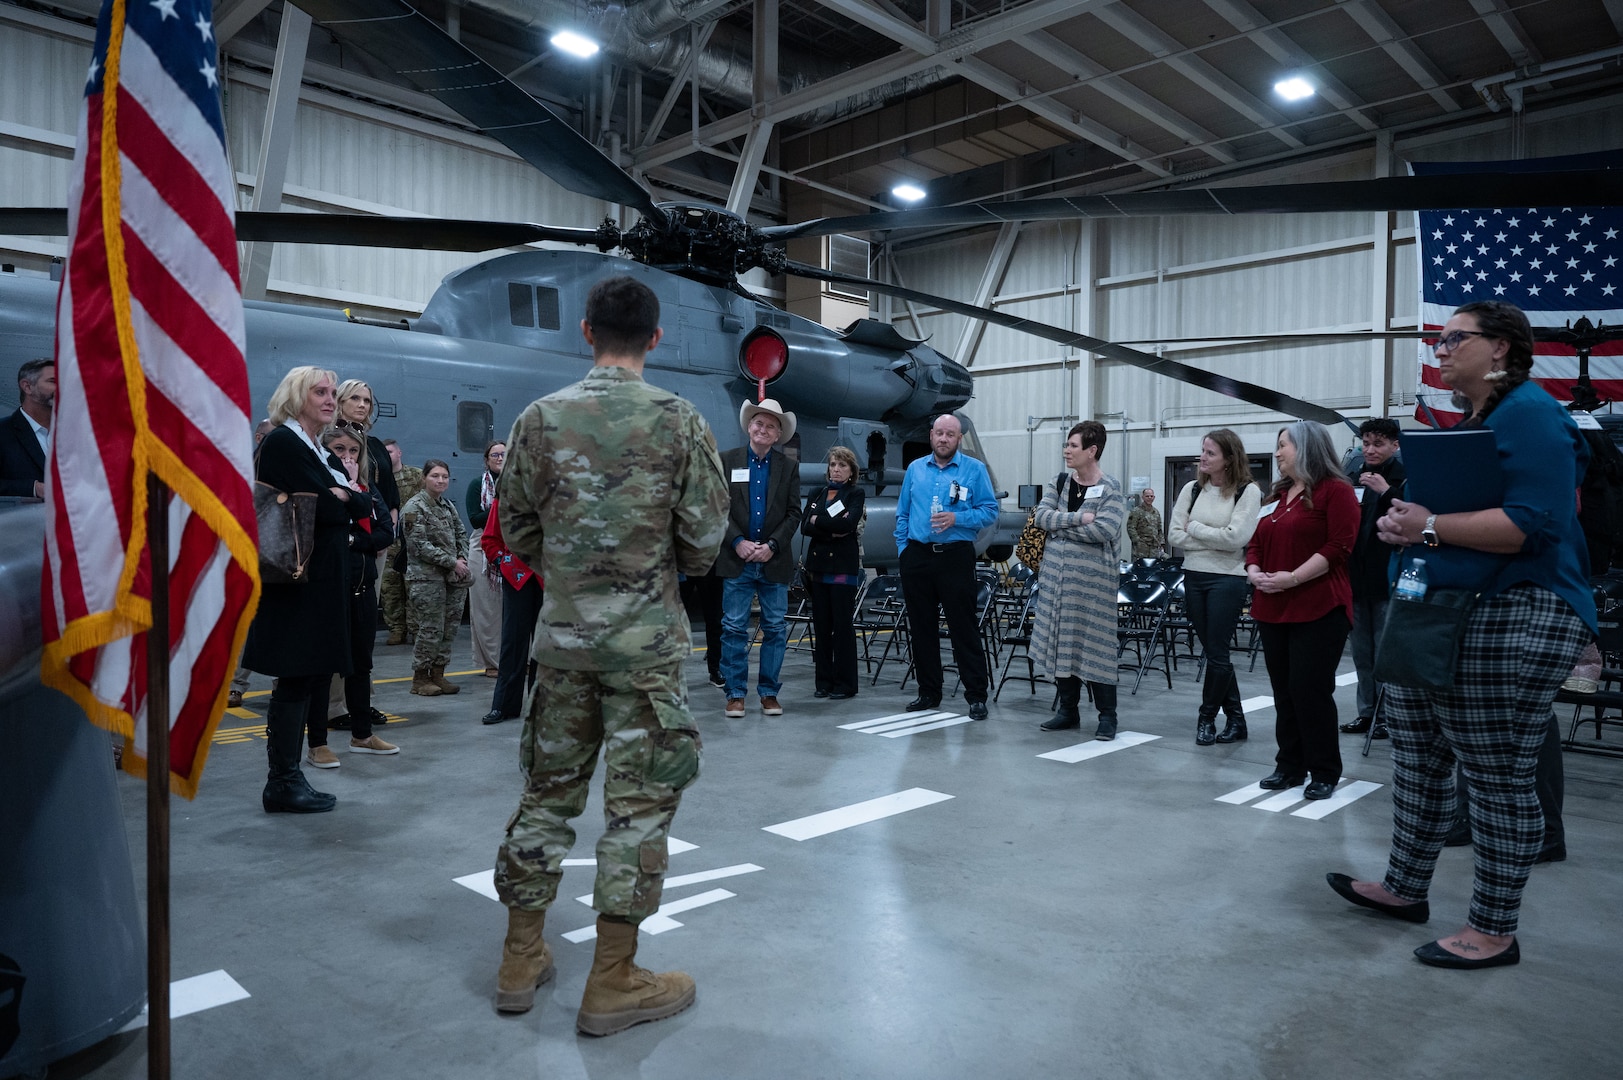 A U.S. Air Force Airman assigned to the 344th Training Squadron explains his technical school experience to civic leaders.